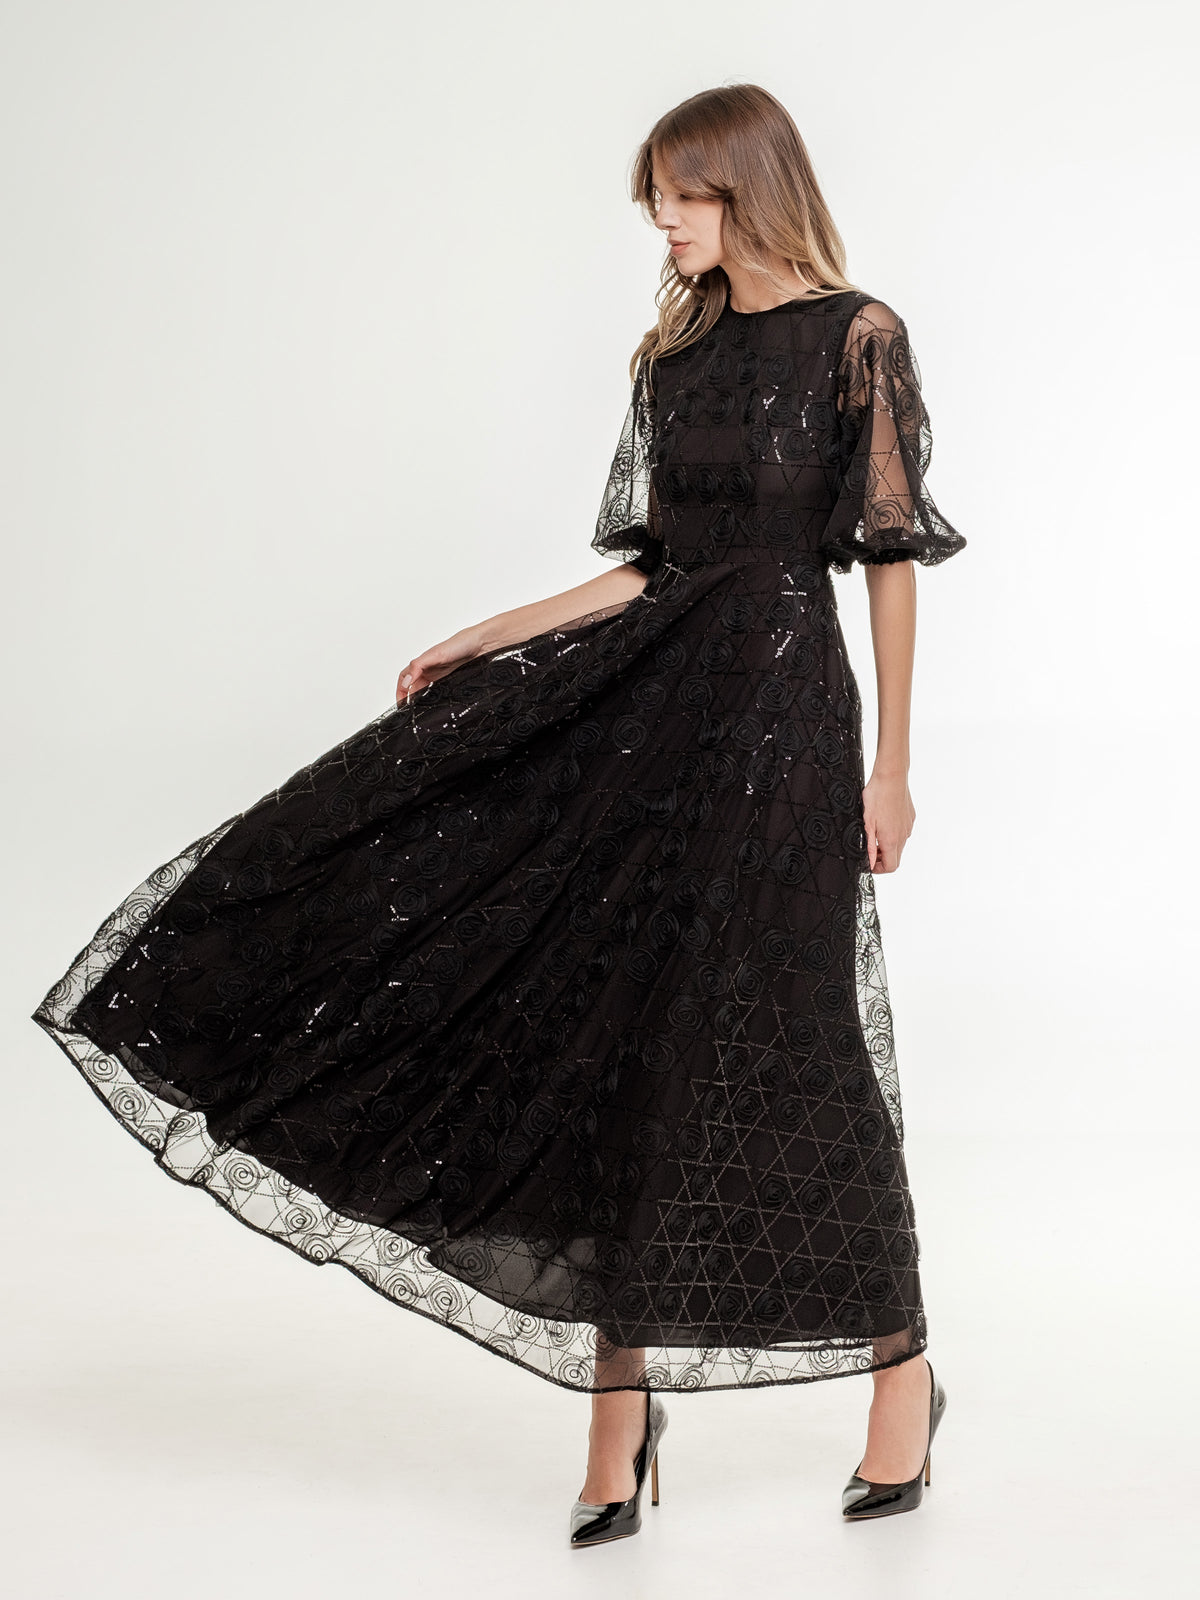 Luxurious black lace dress with sequins wide skirt